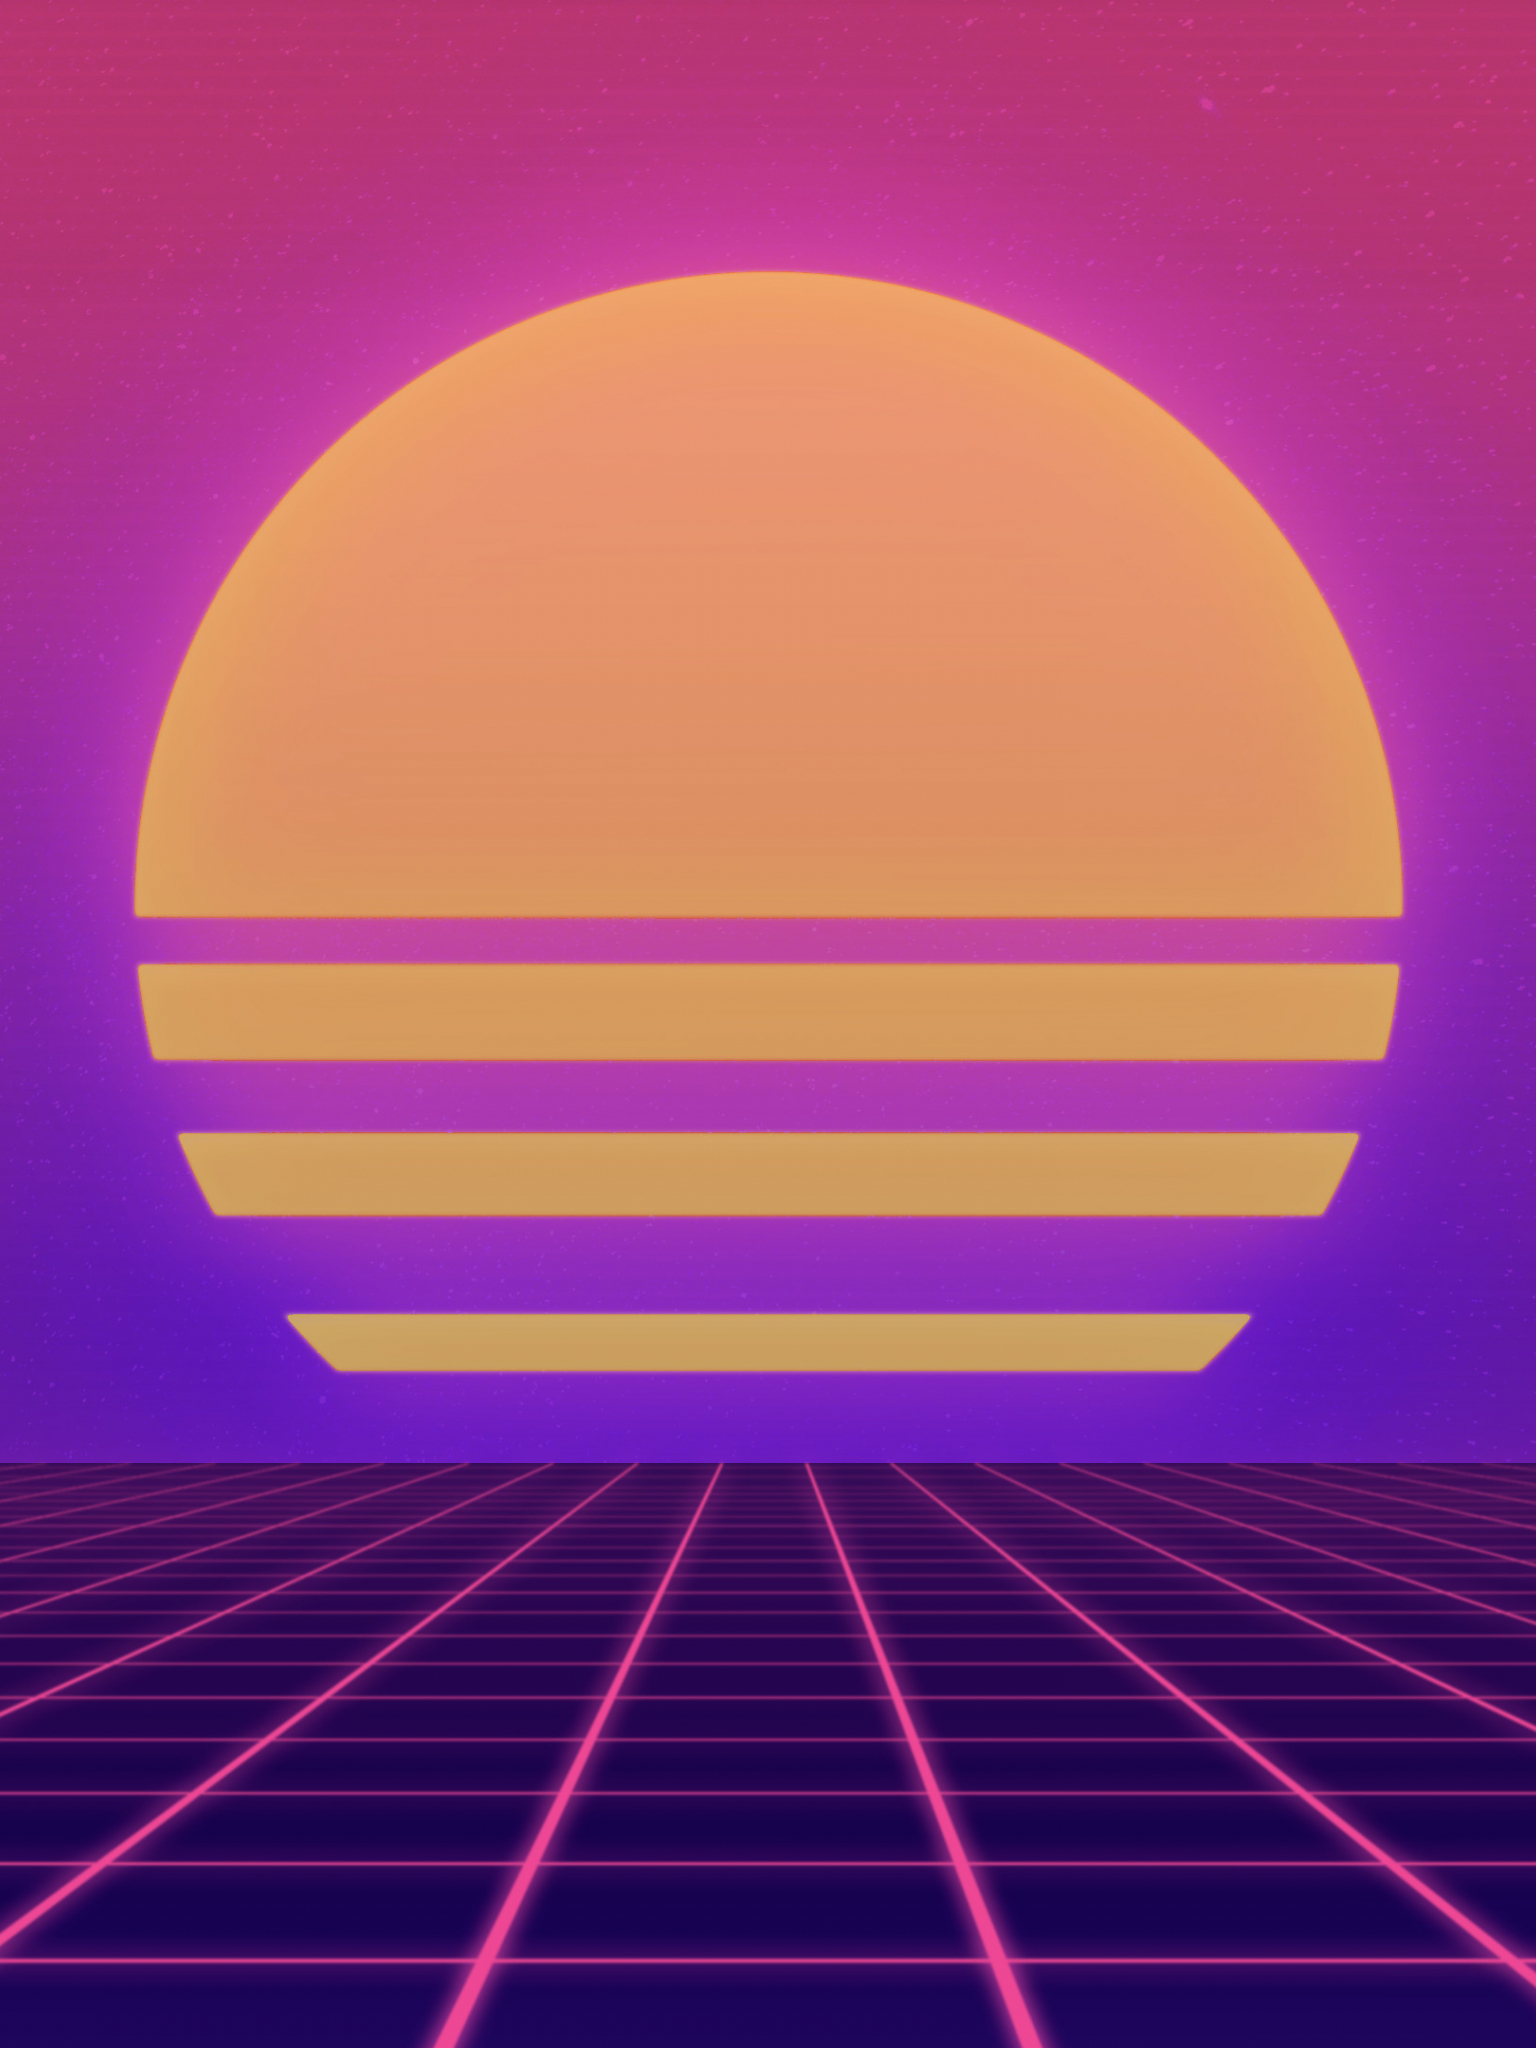 80s Aesthetic Wallpapers 80sdesign Images